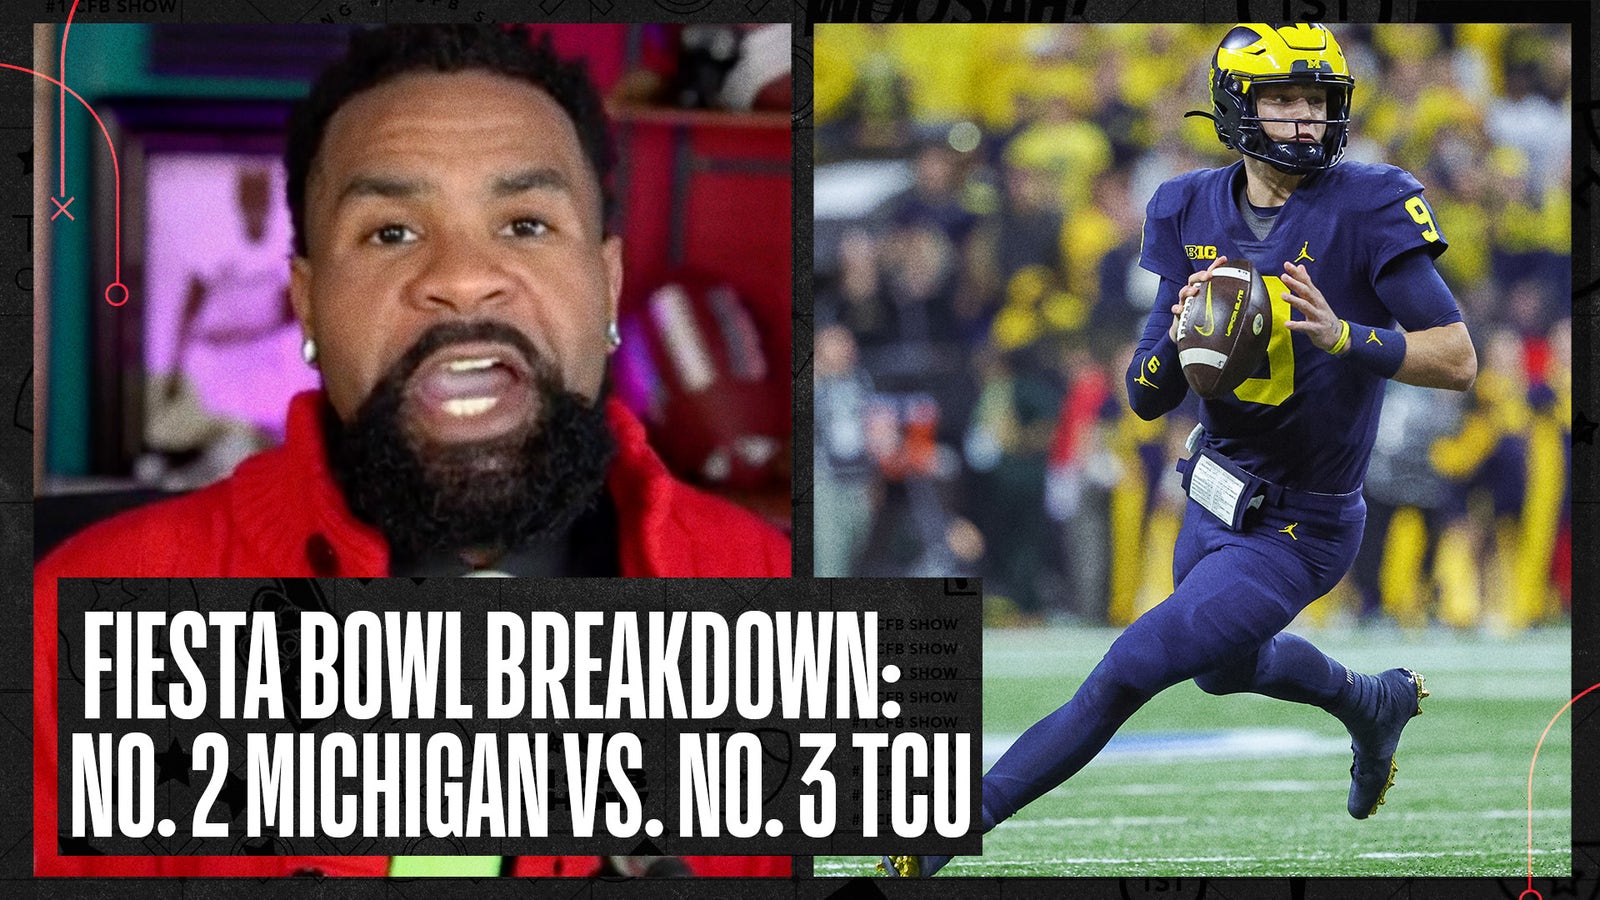 What is at stake for Michigan and the TCU?